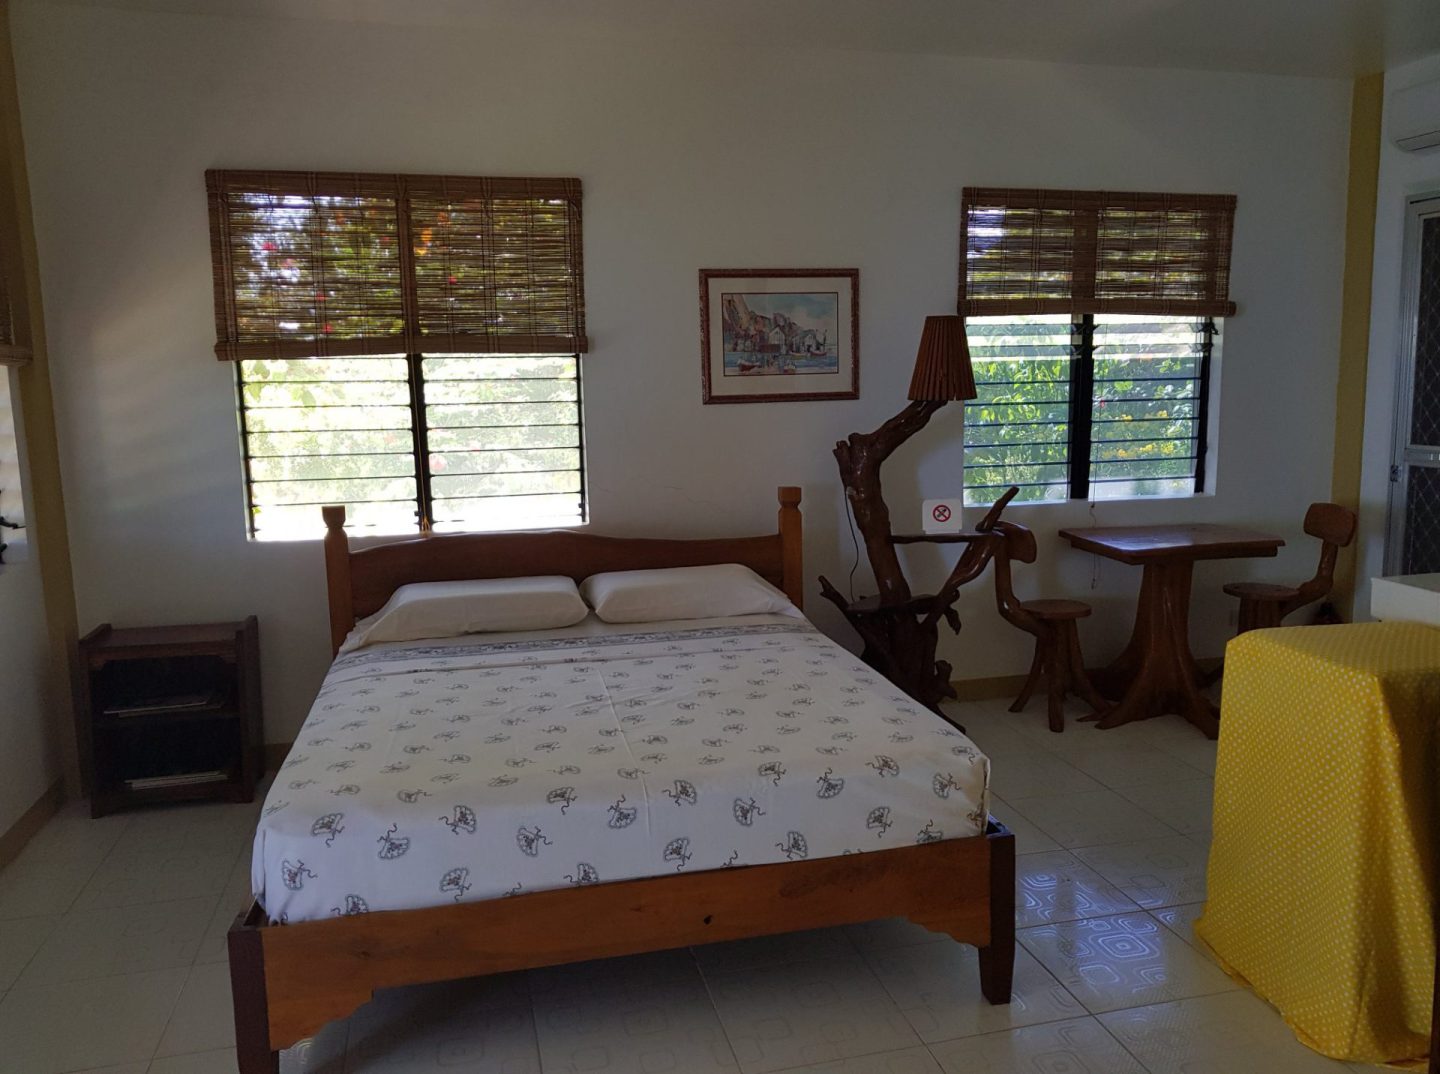 Pine 1 airconditioned Room. Photo from Sea Turtle Lagoon Resort's Facebook Page